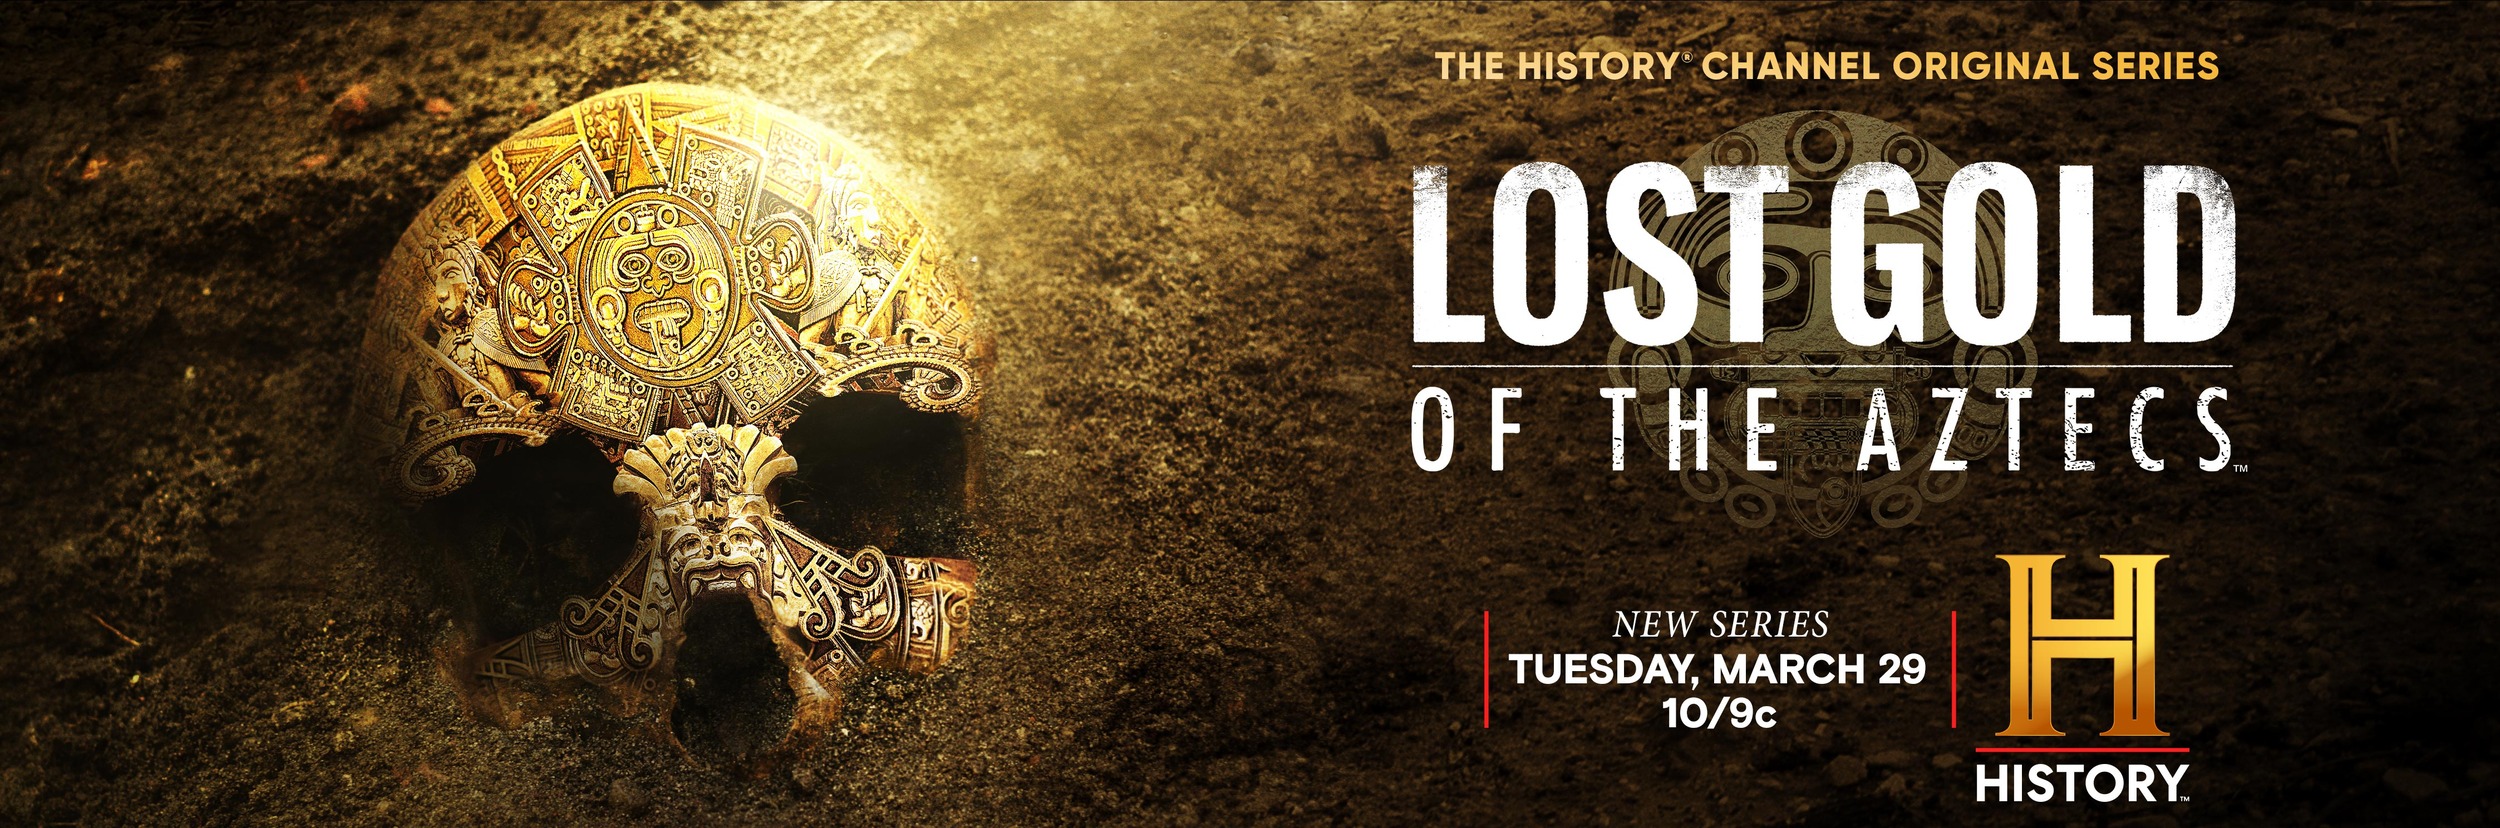 Mega Sized Movie Poster Image for Lost Gold of the Aztecs (#2 of 2)